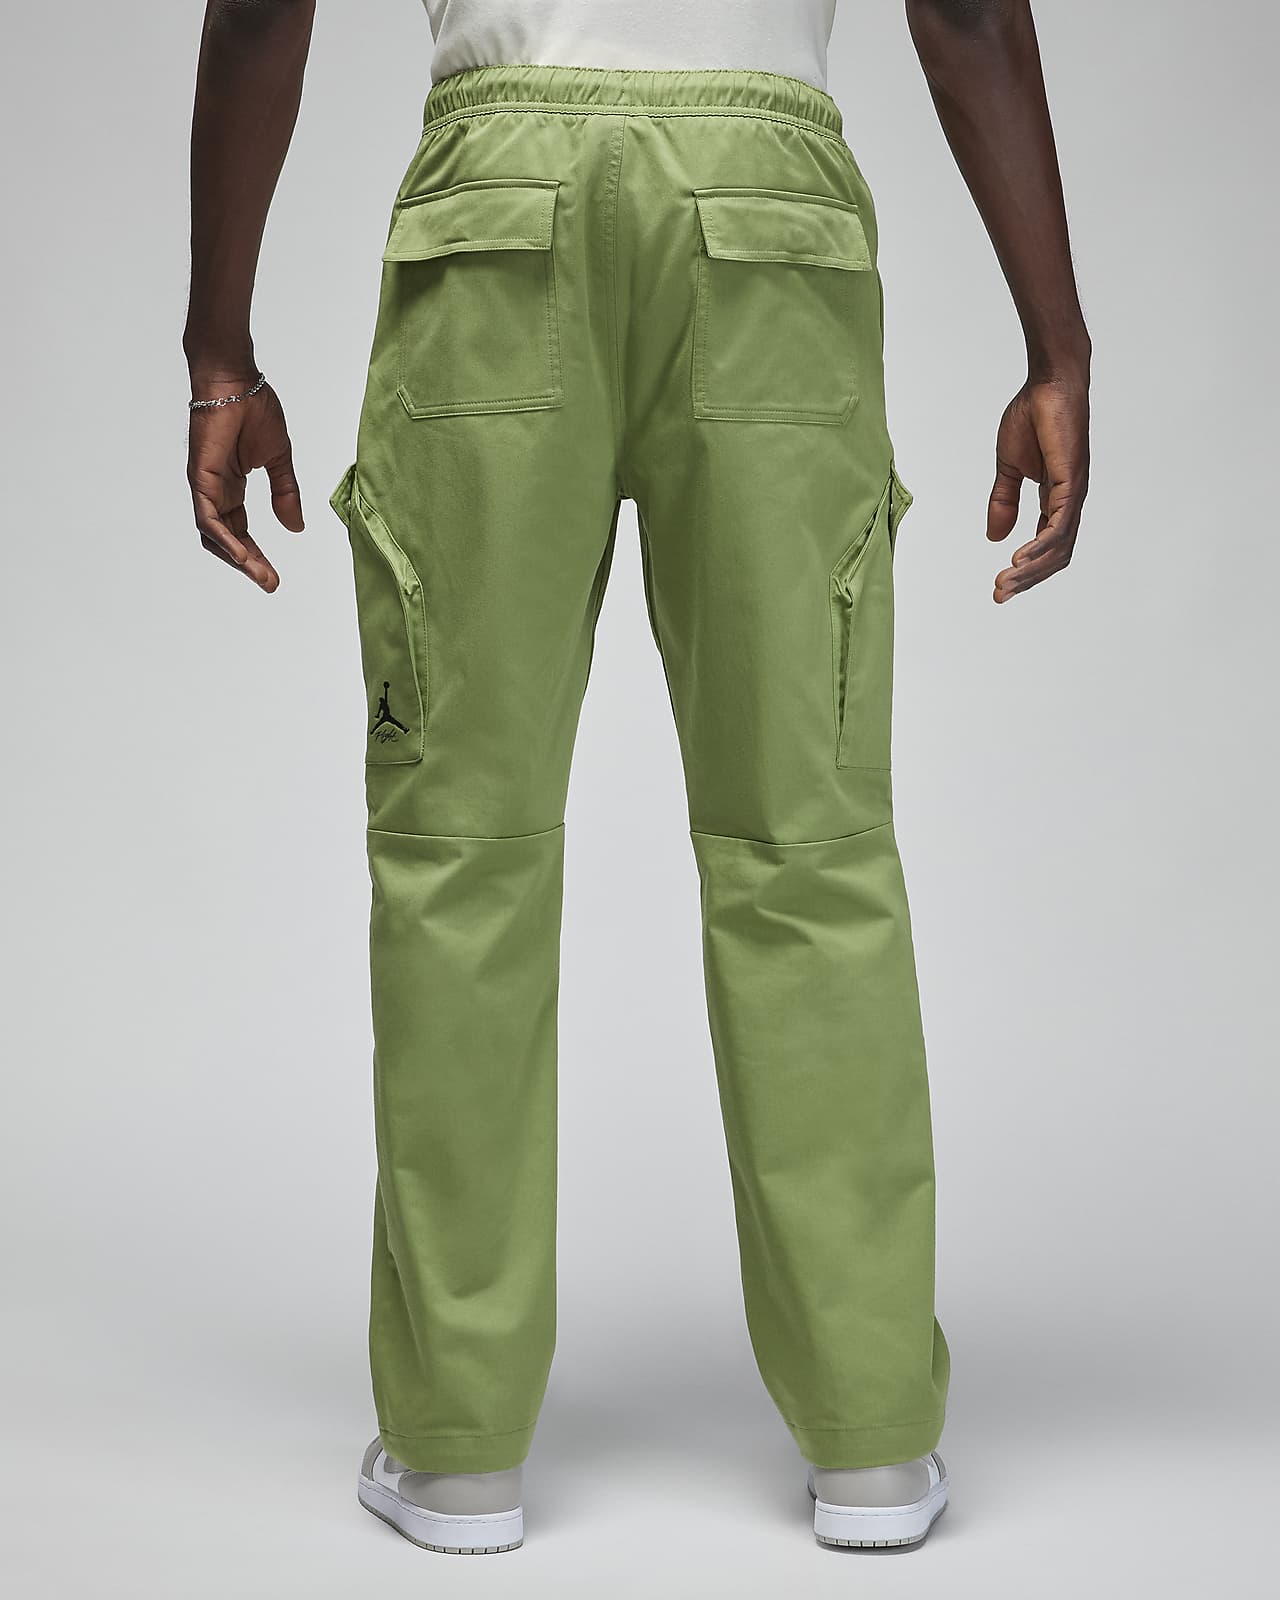 Women's Multi-Pocket Button Fly Cuffed Cargo Pants in 2 Colors